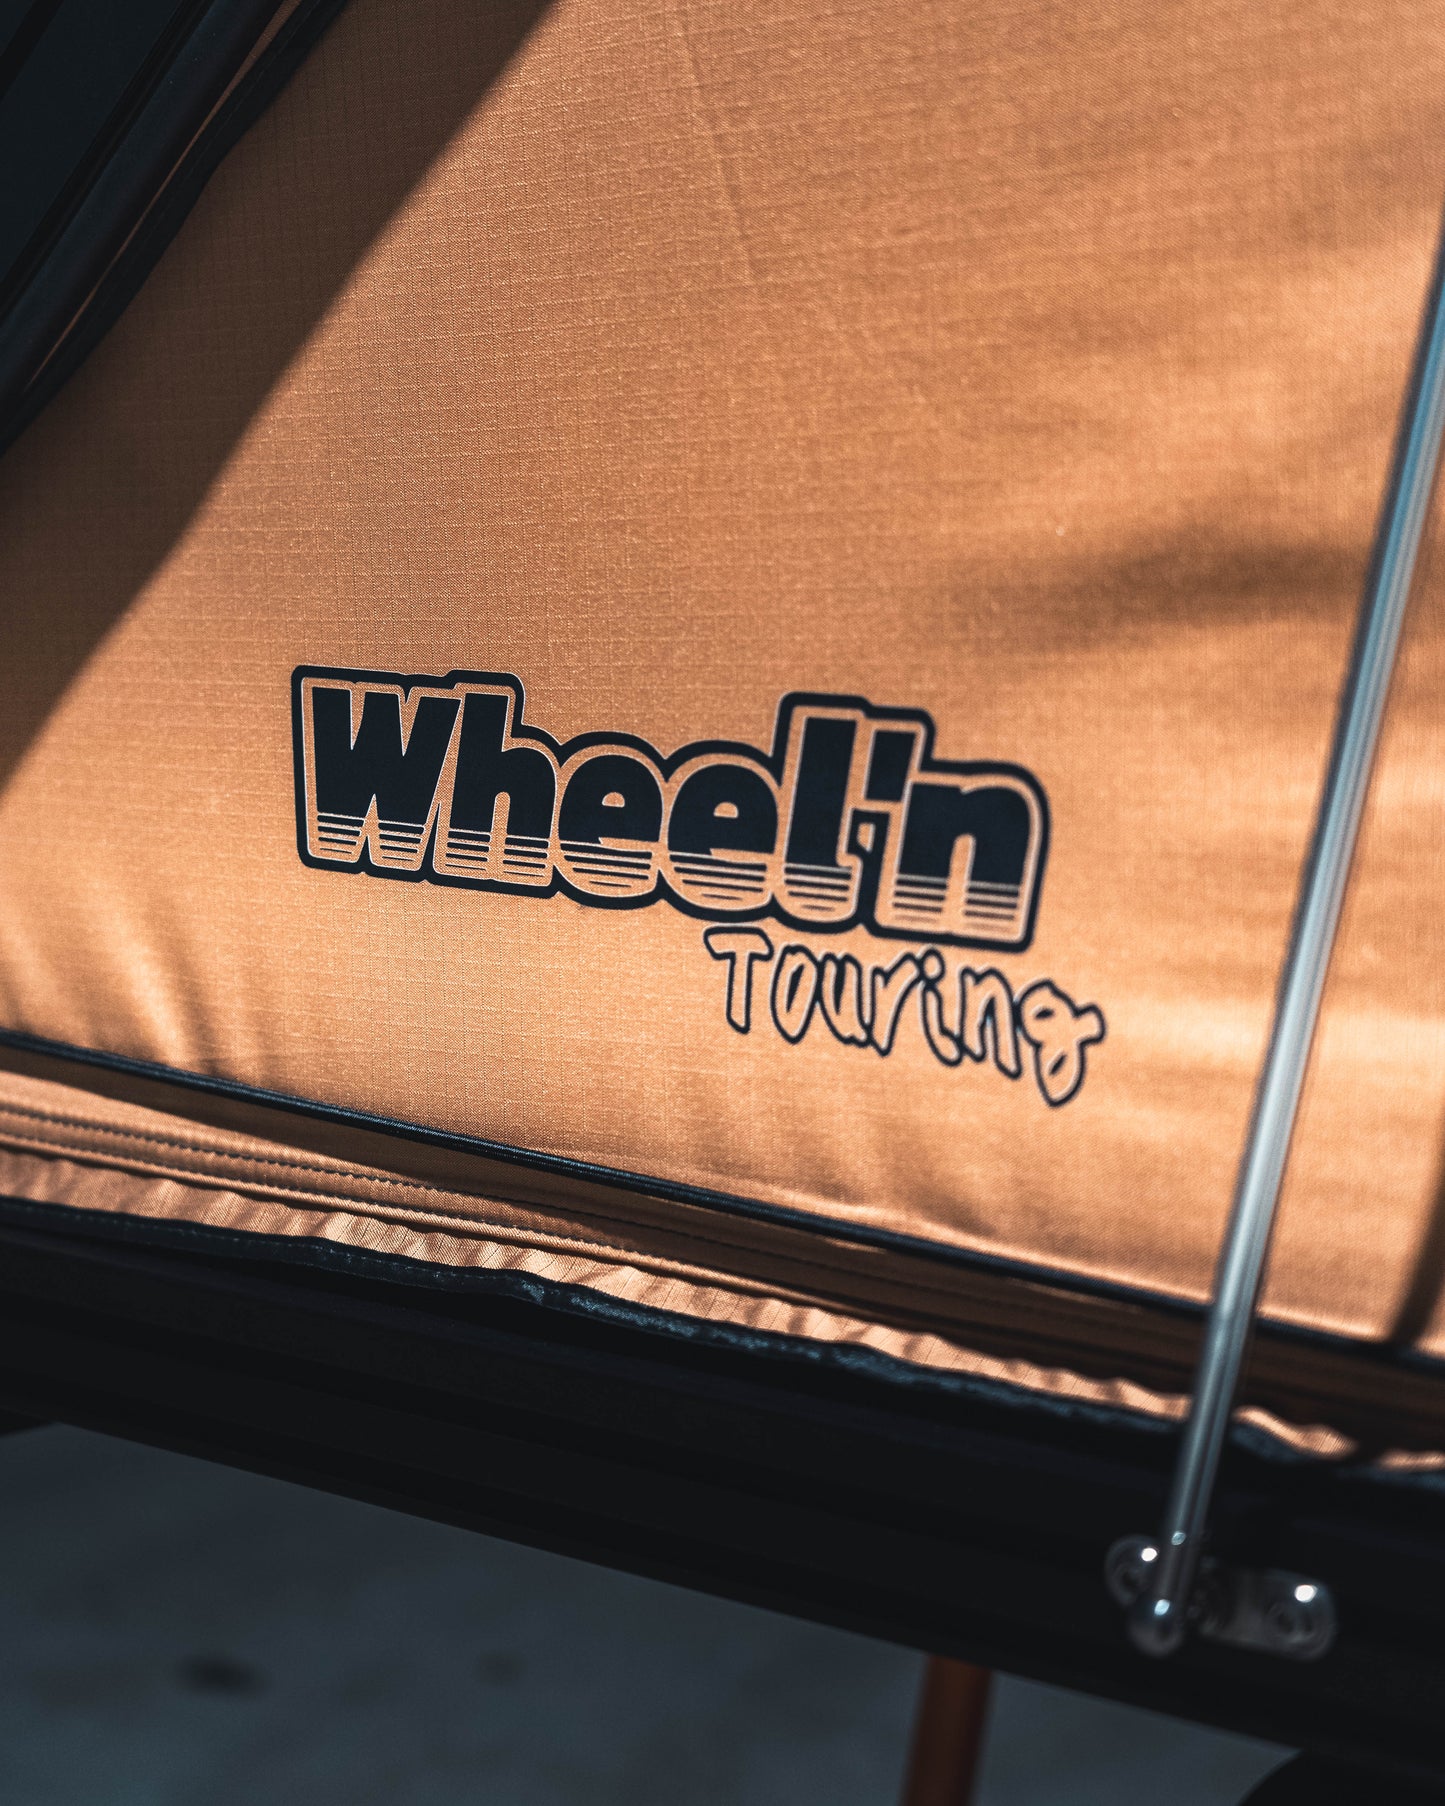 Wheel'n Touring "The Hut" Clamshell 1.3 Rooftop Tent (deposit) IN STOCK!